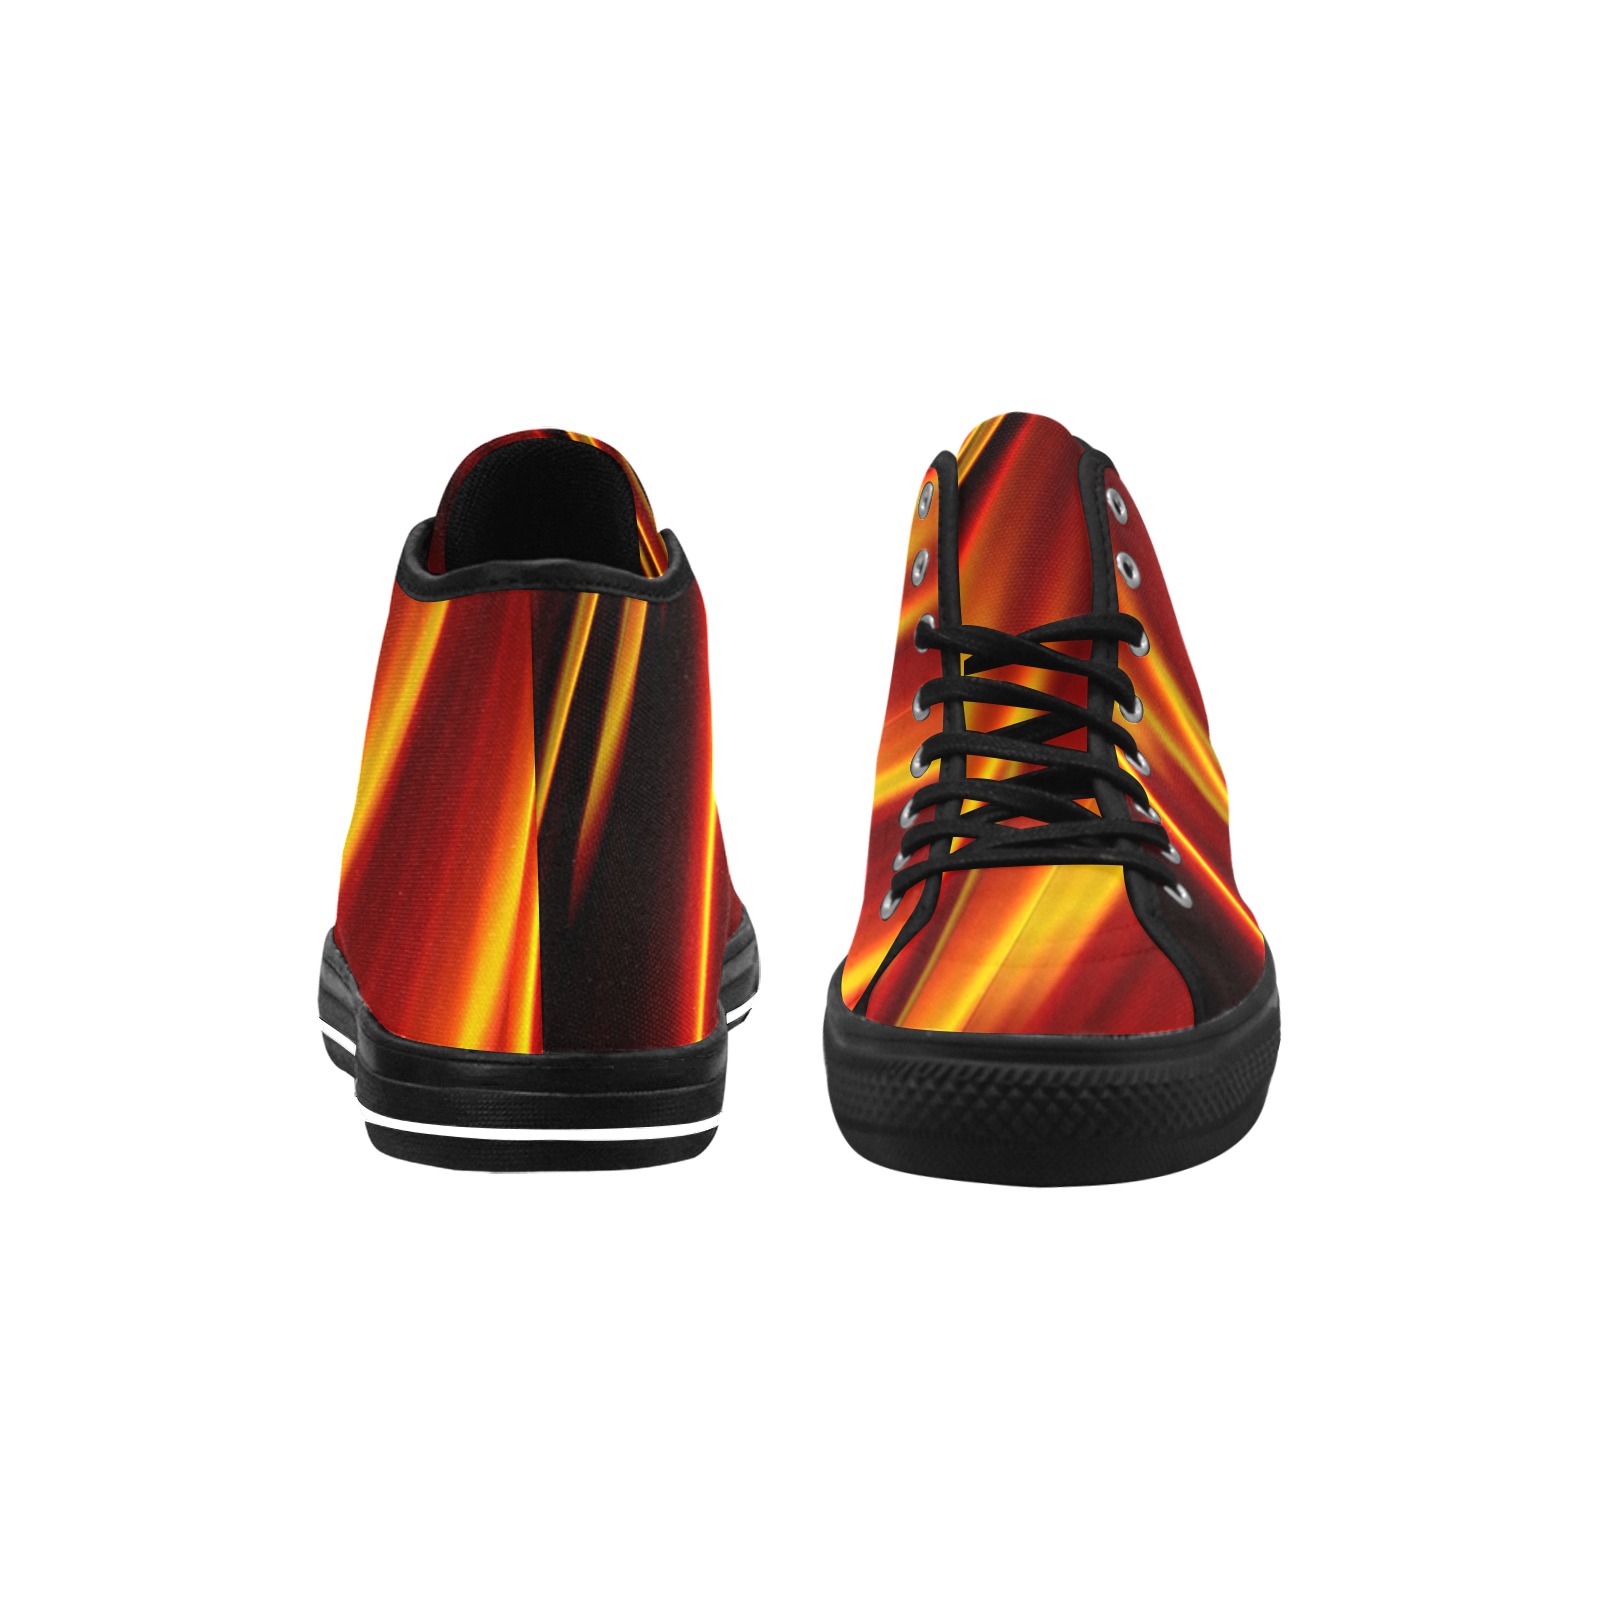 Orange and Red Flames Fractal Abstract Vancouver H Men's Canvas Shoes (1013-1)